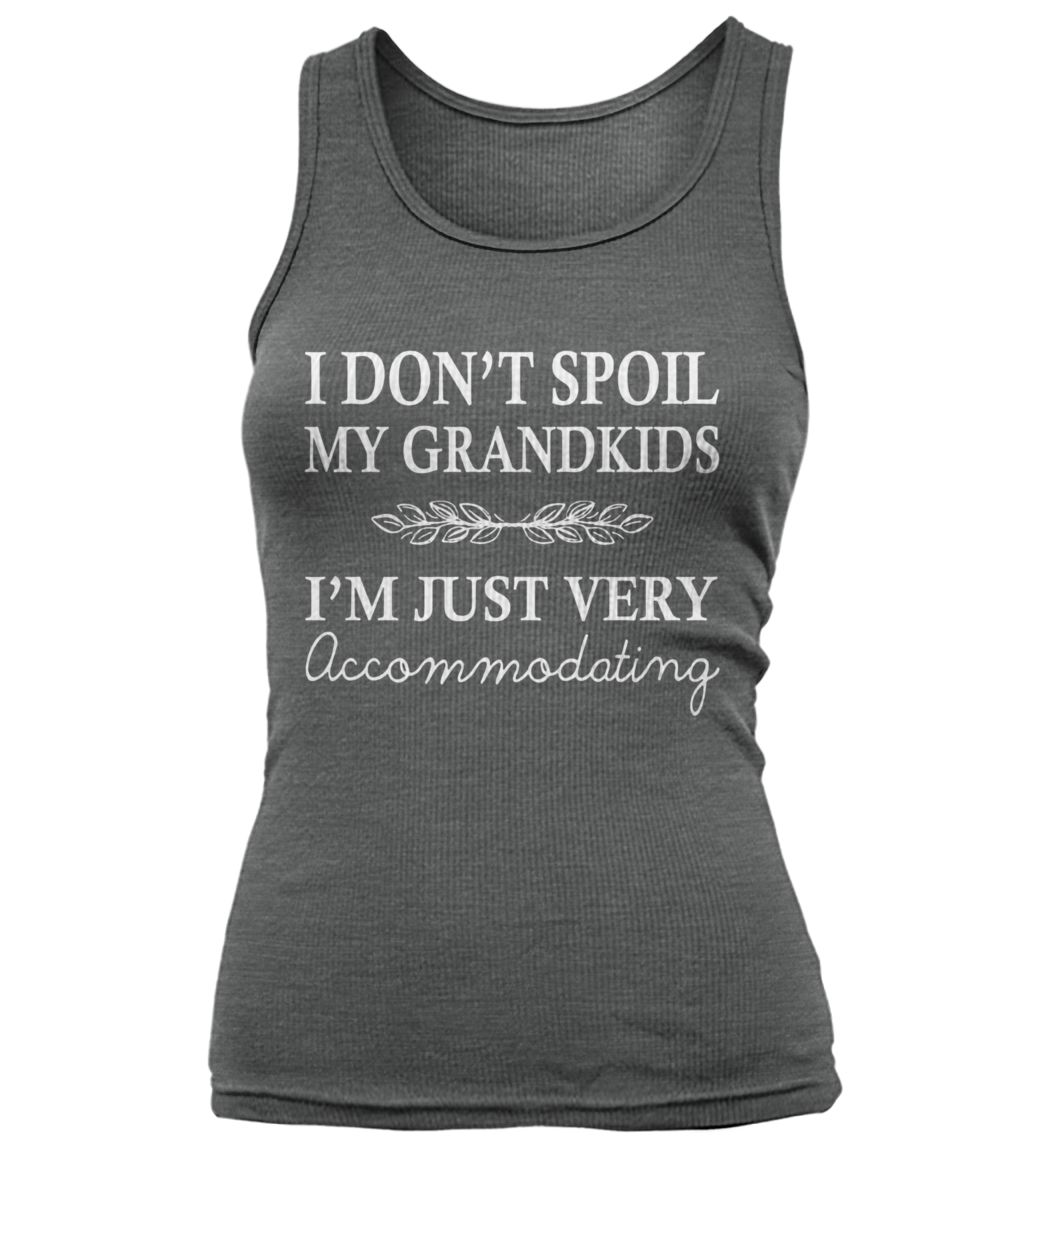 I don't spoil my grandkids I'm just very accommodating women's tank top